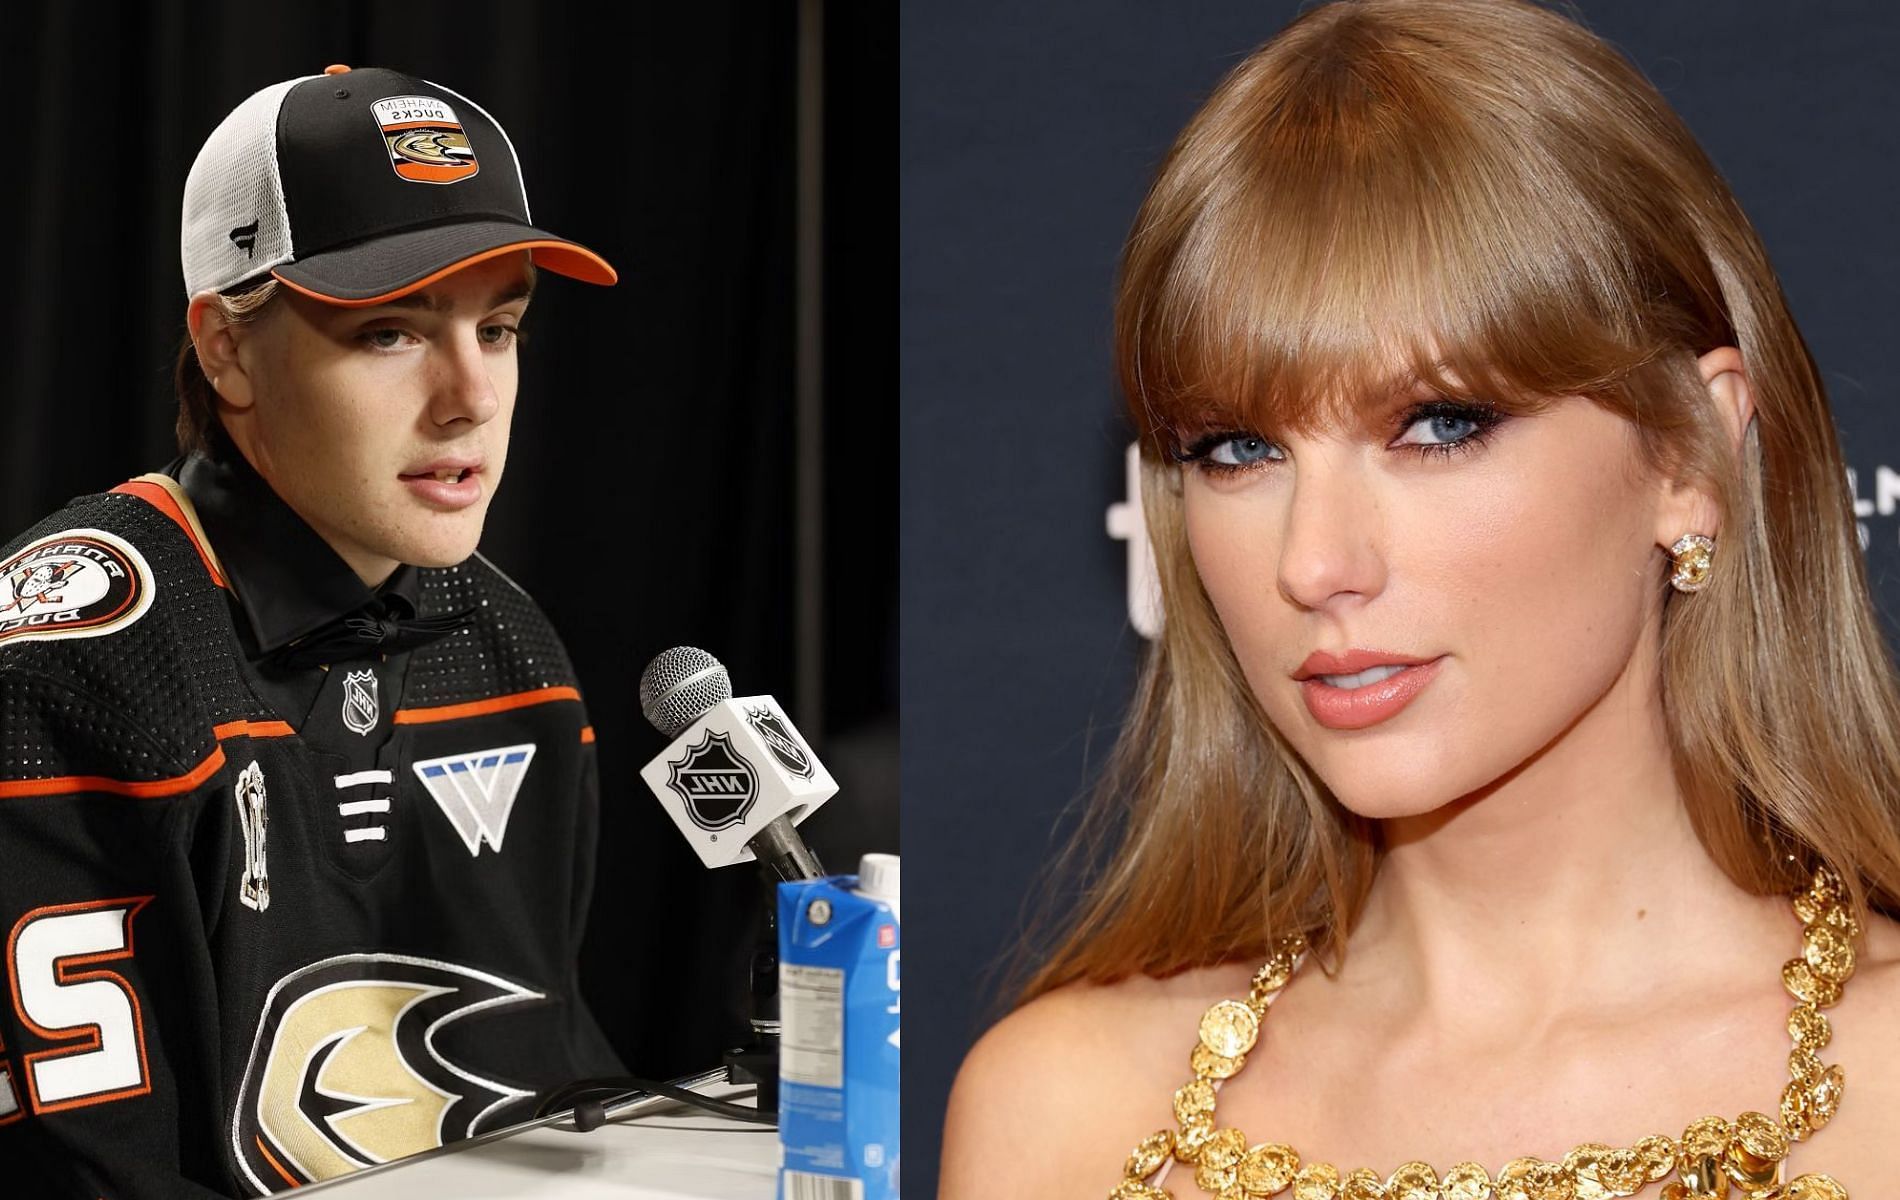 Anaheim Ducks prospects recommend their favorite Taylor Swift songs